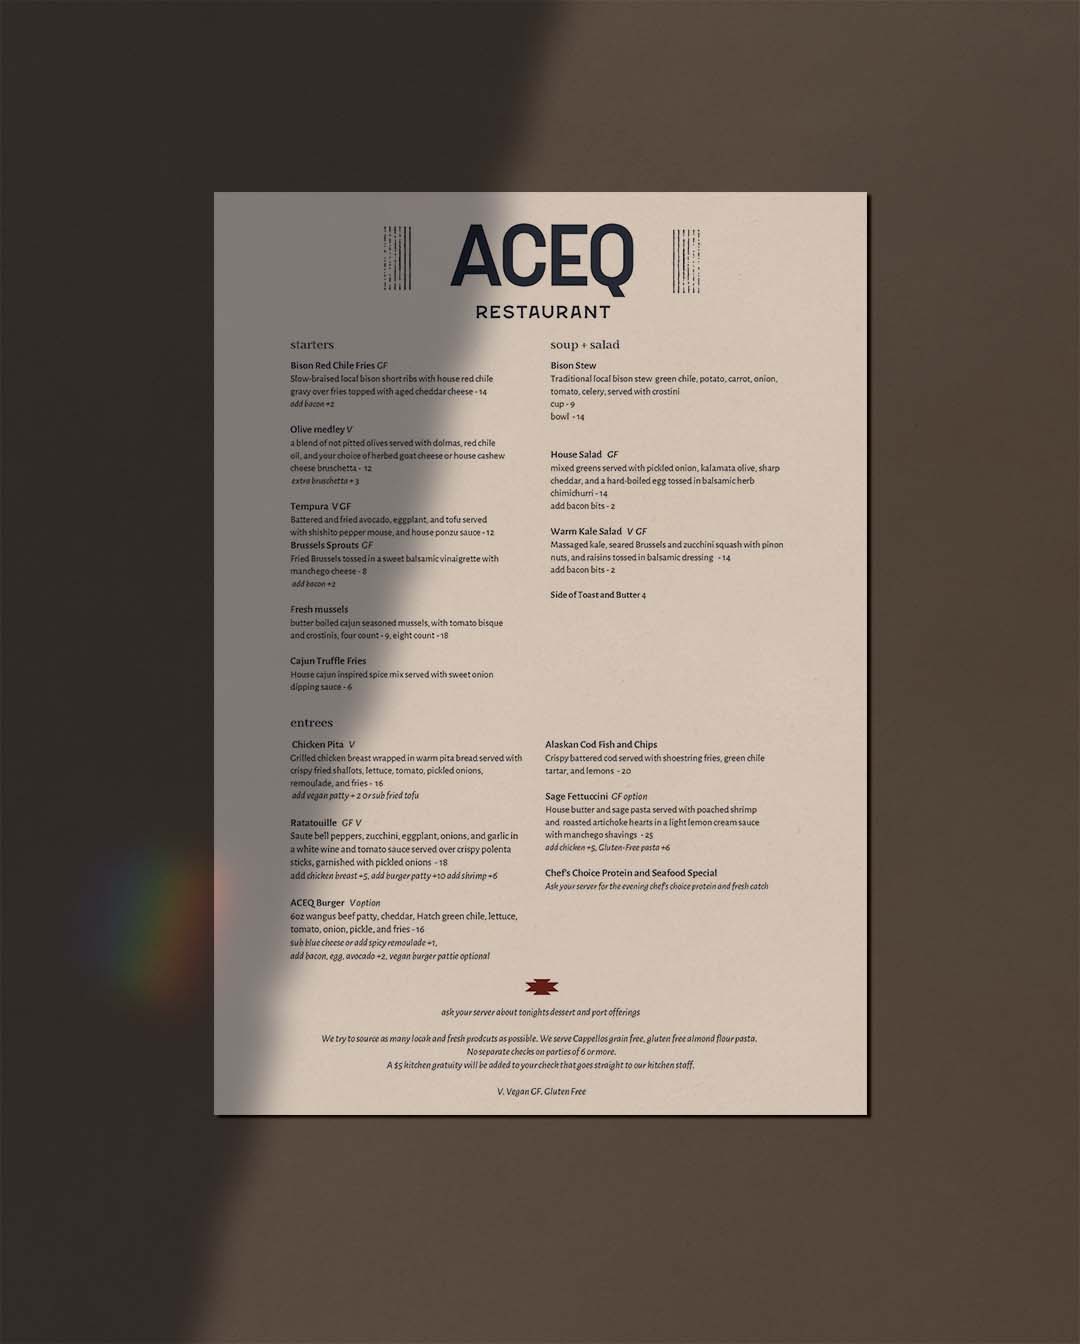 ACEQ Restaurant in Taos New Mexico Menu Design and Branding By Stellen Design Branding Agency in Los Angeles California Specializing in Logo Design